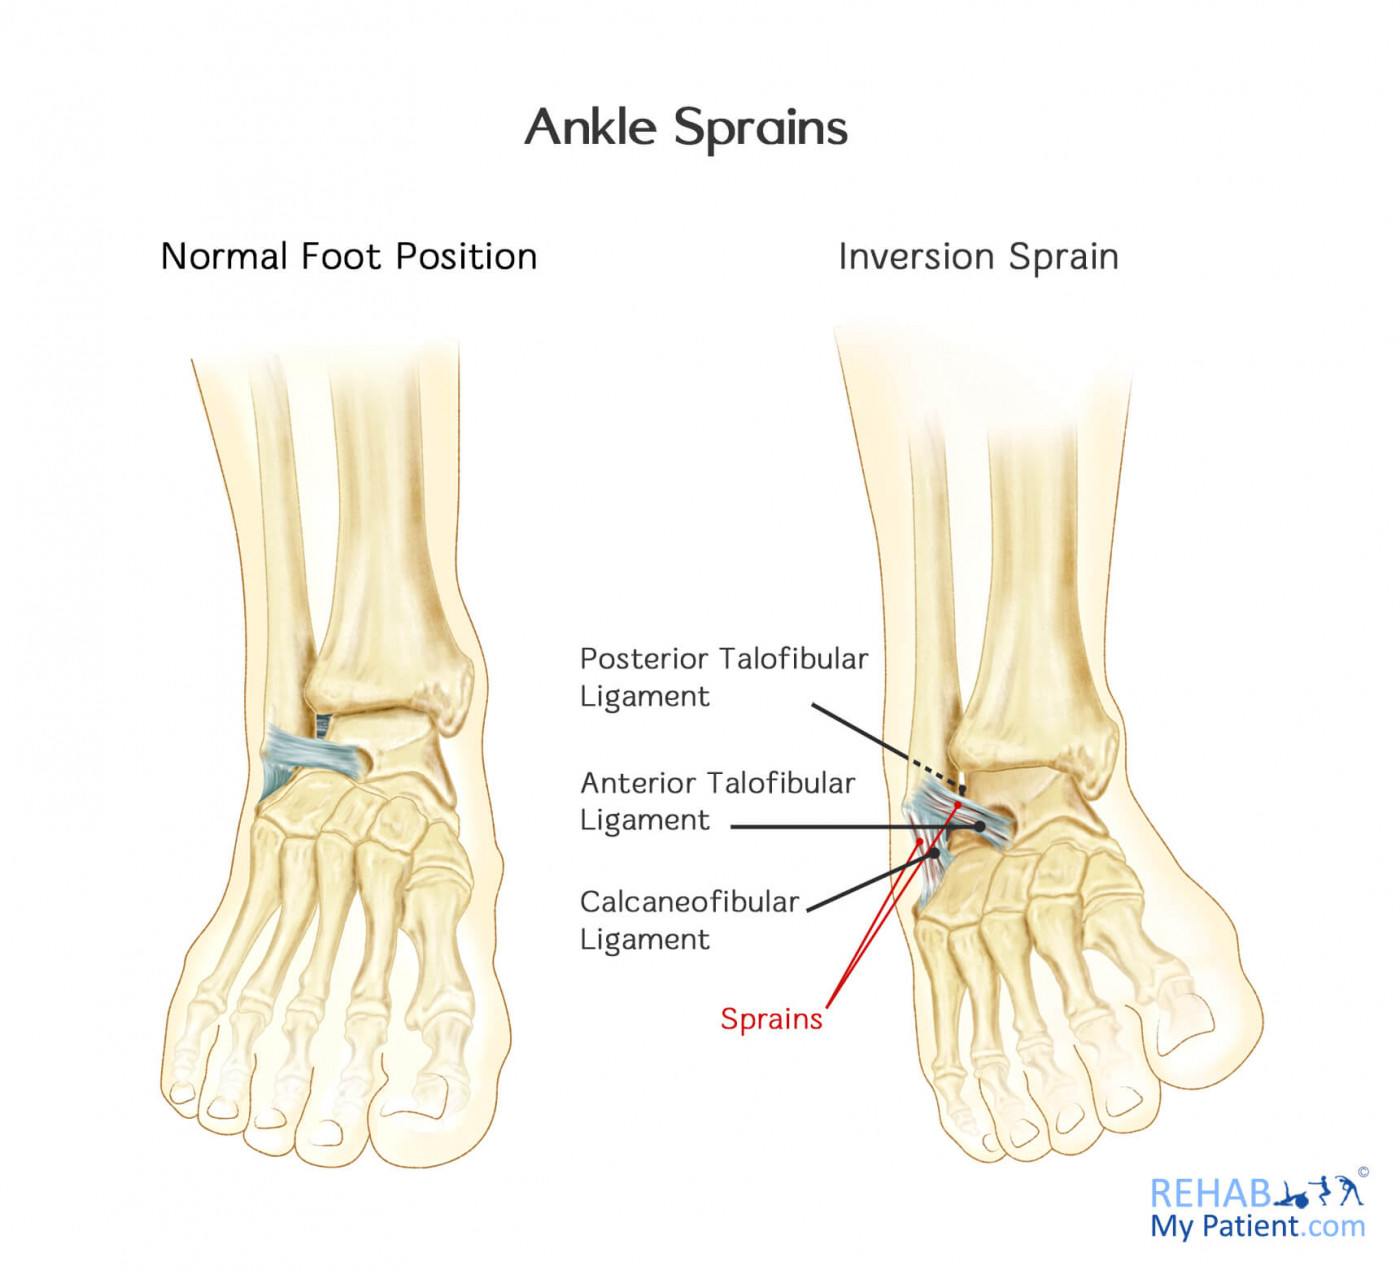 What Are the Symptoms of a Deltoid Ligament Sprain?